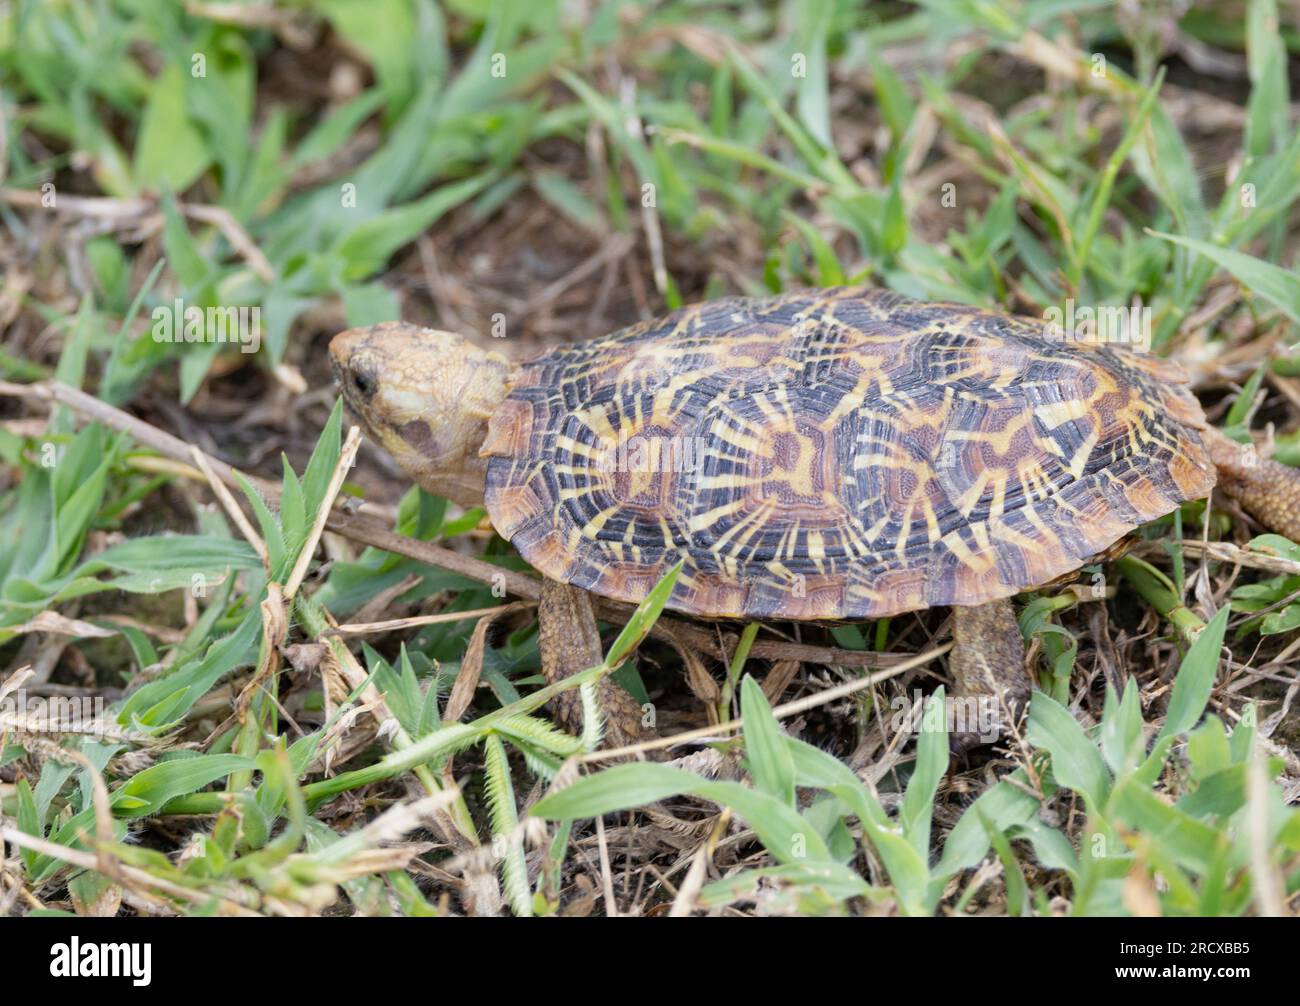 The Pancake Tortoise is a rare and endemic tortoise found only in areas of granite outcrops in East Africa. Stock Photo